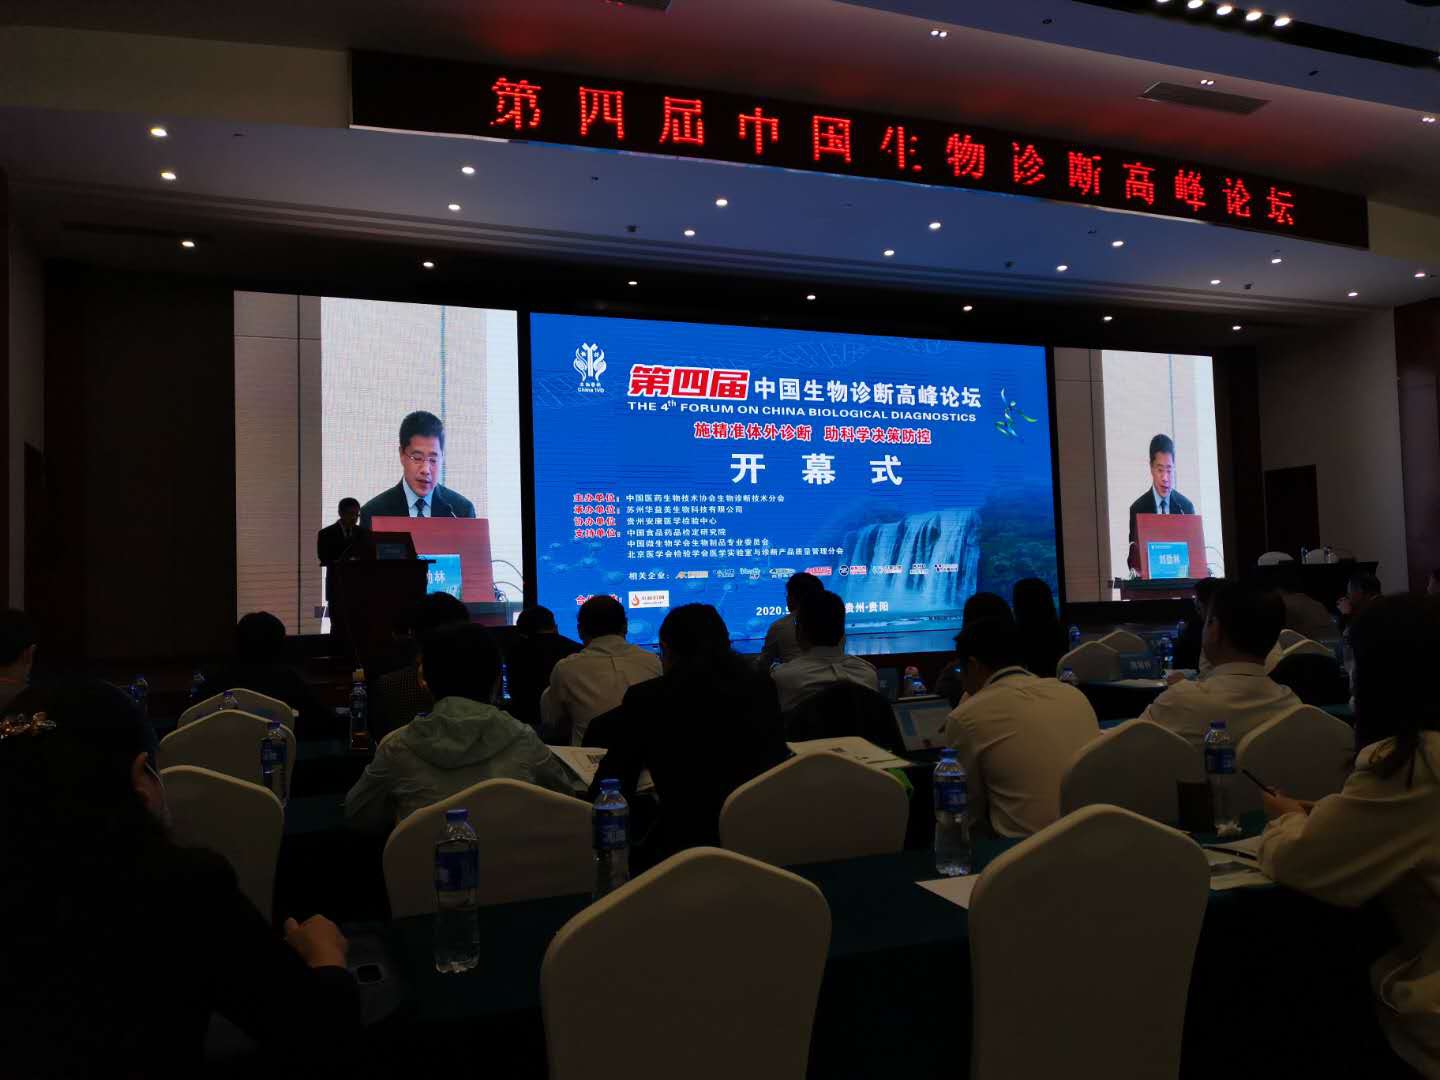 【Conference News】BACME Biotech hosts The 4th Forum on China Biological Diagnostics.